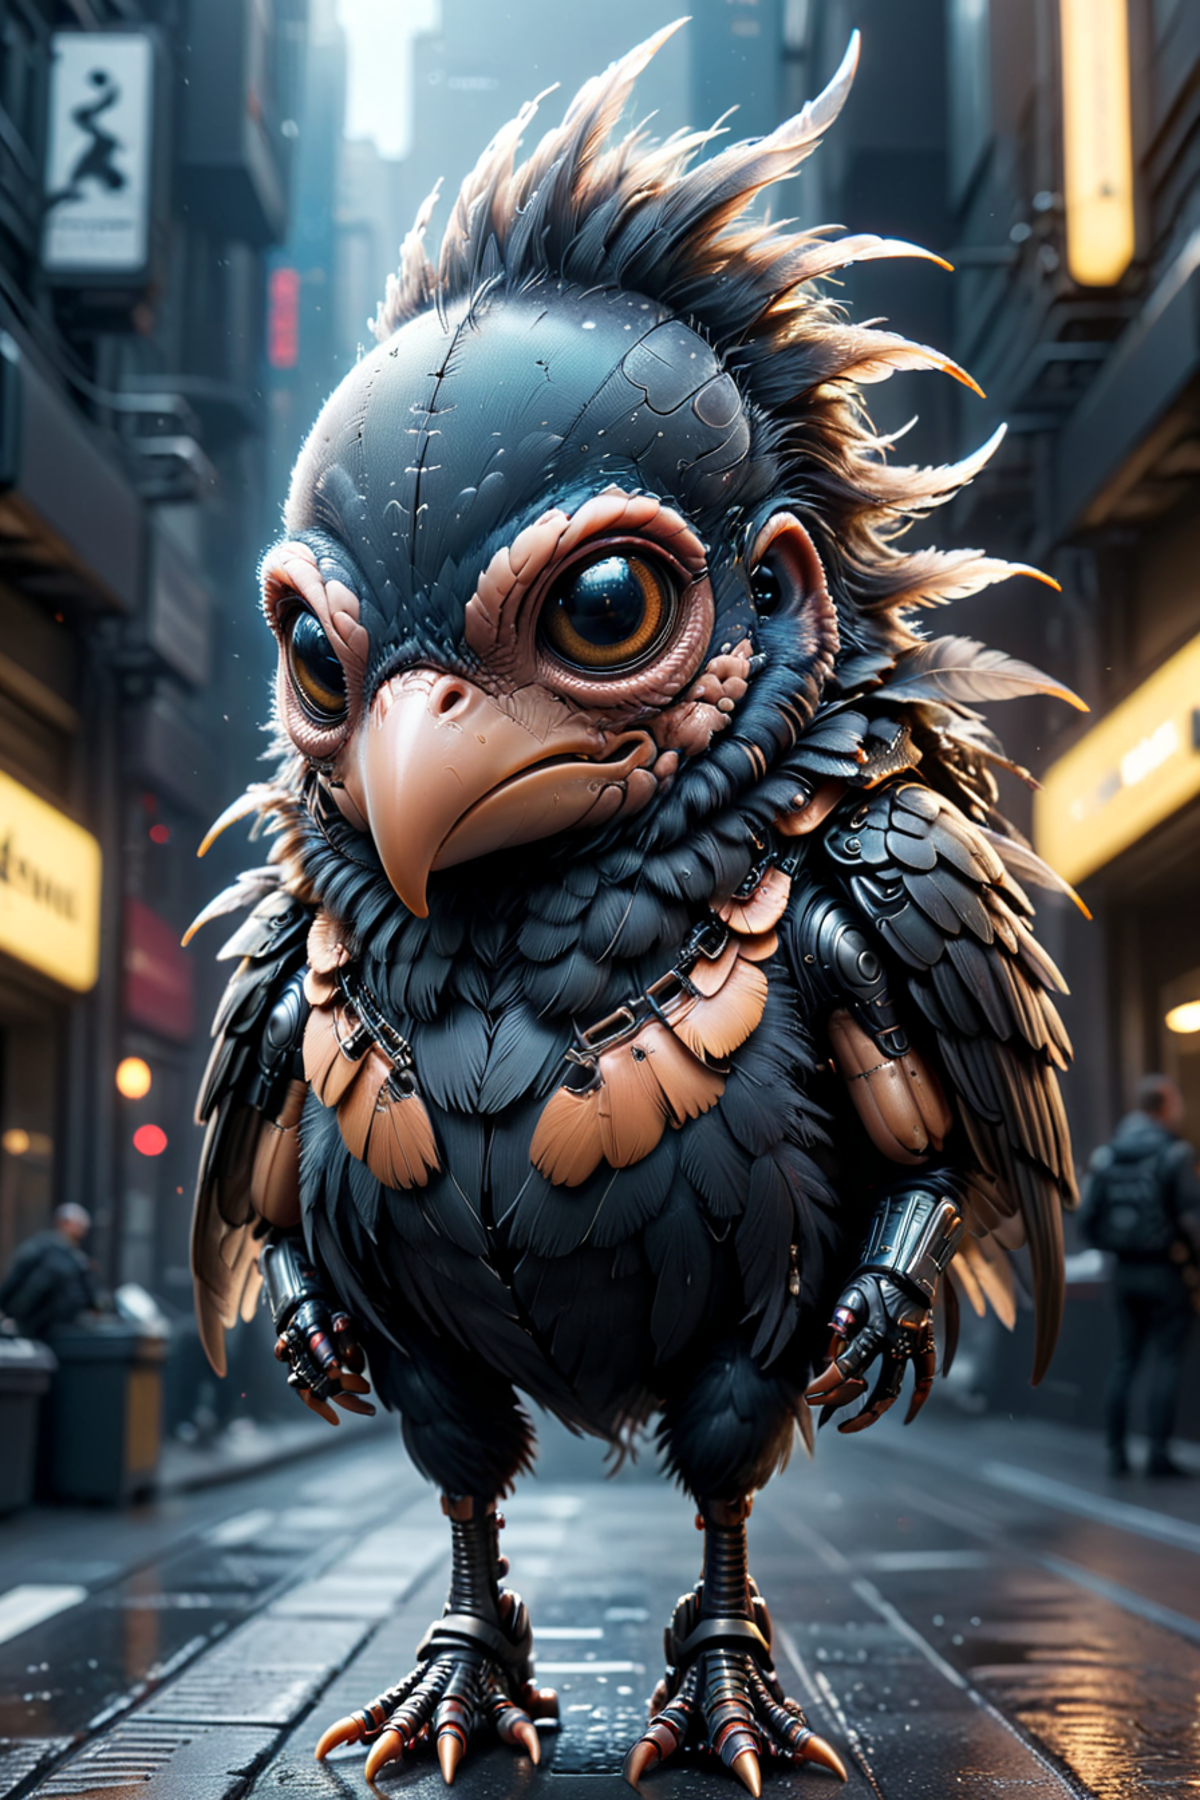 A giant robotic owl is standing on a street in a city, attracting attention with its unusual appearance.